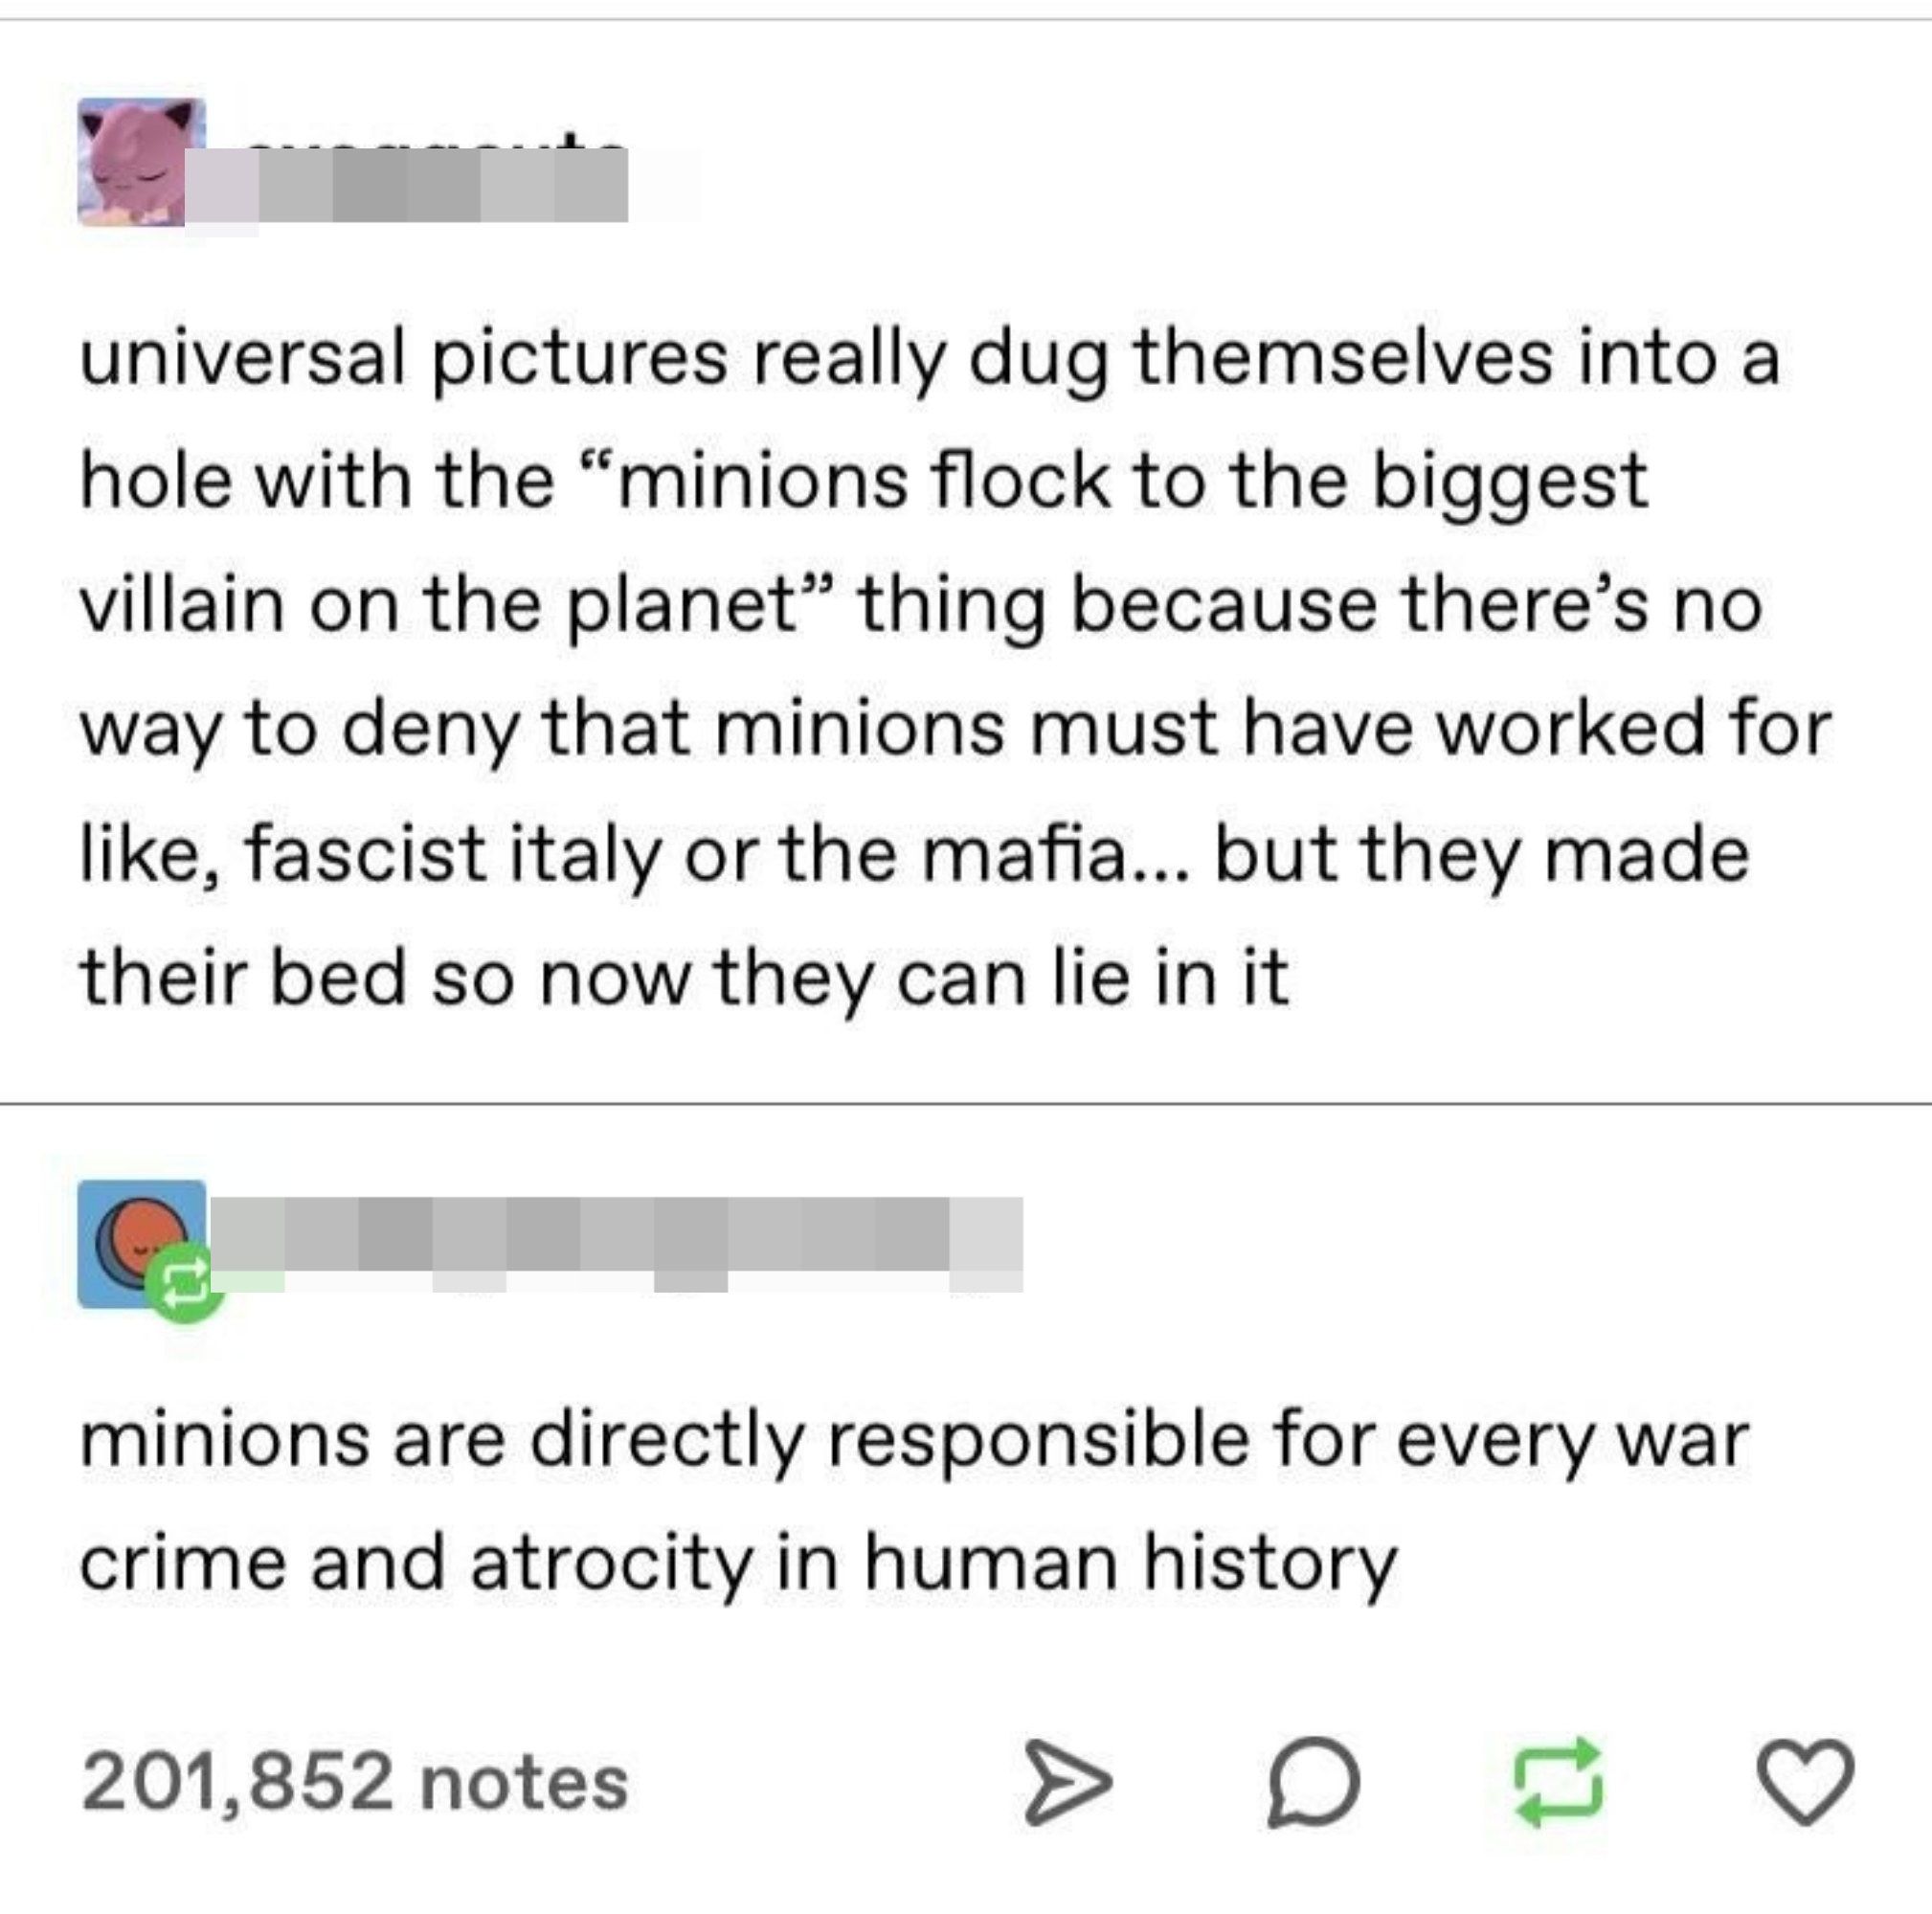 minions are directly responsible for every war crime and atrocity in human history